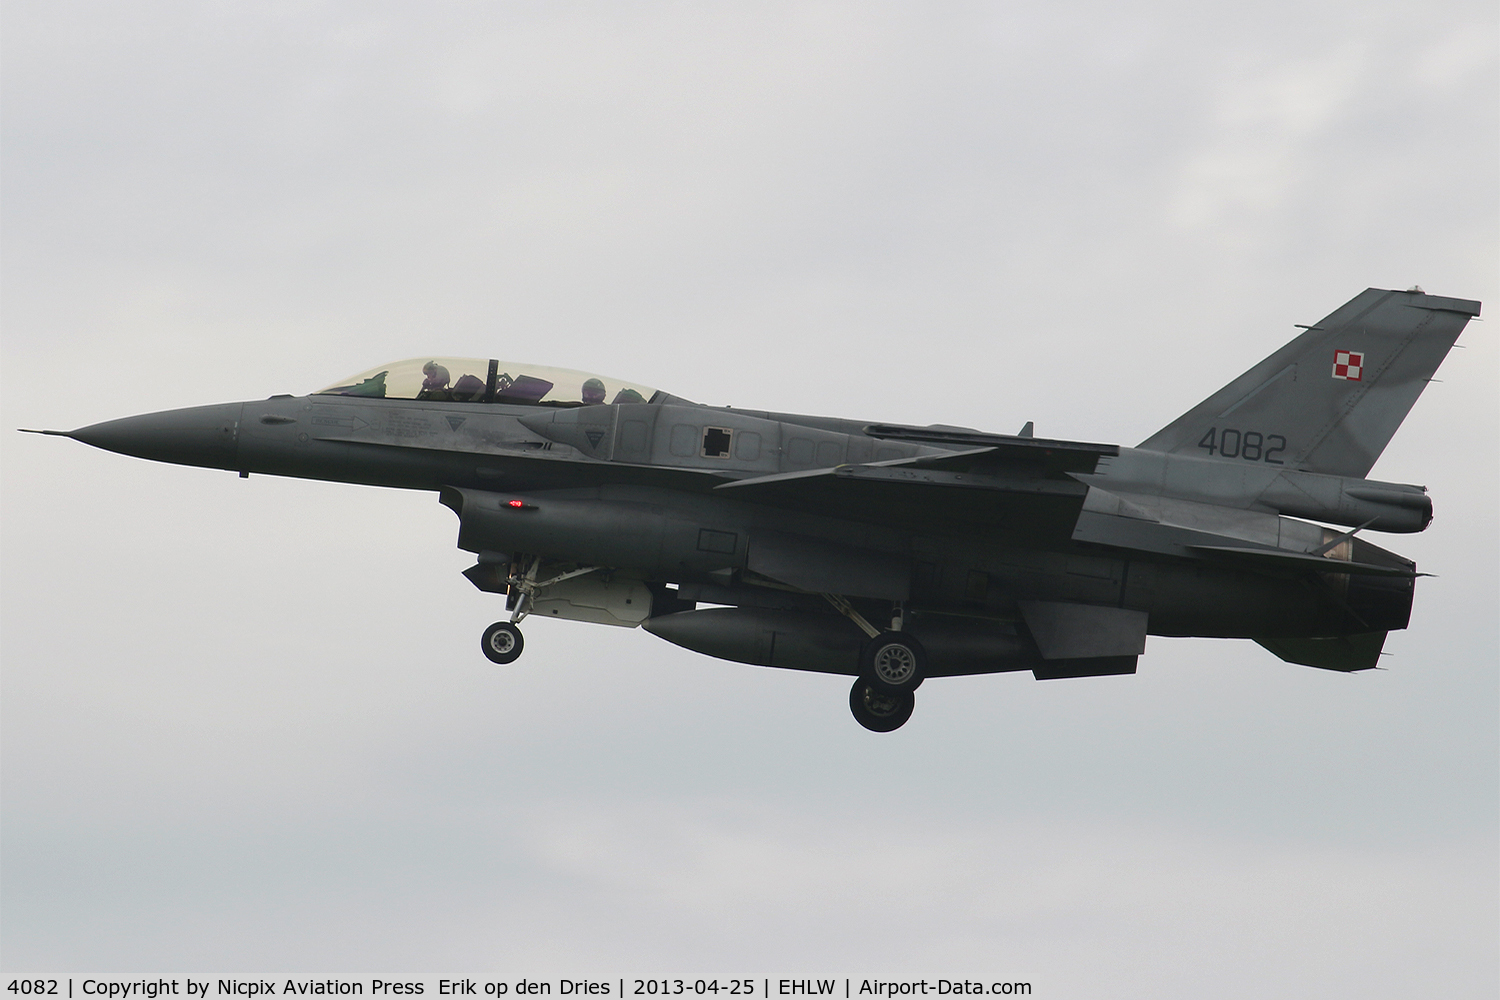 4082, Lockheed Martin F-16D Fighting Falcon C/N JD-7, 4082 is a F-16D and participted in Frisian Flag 2013